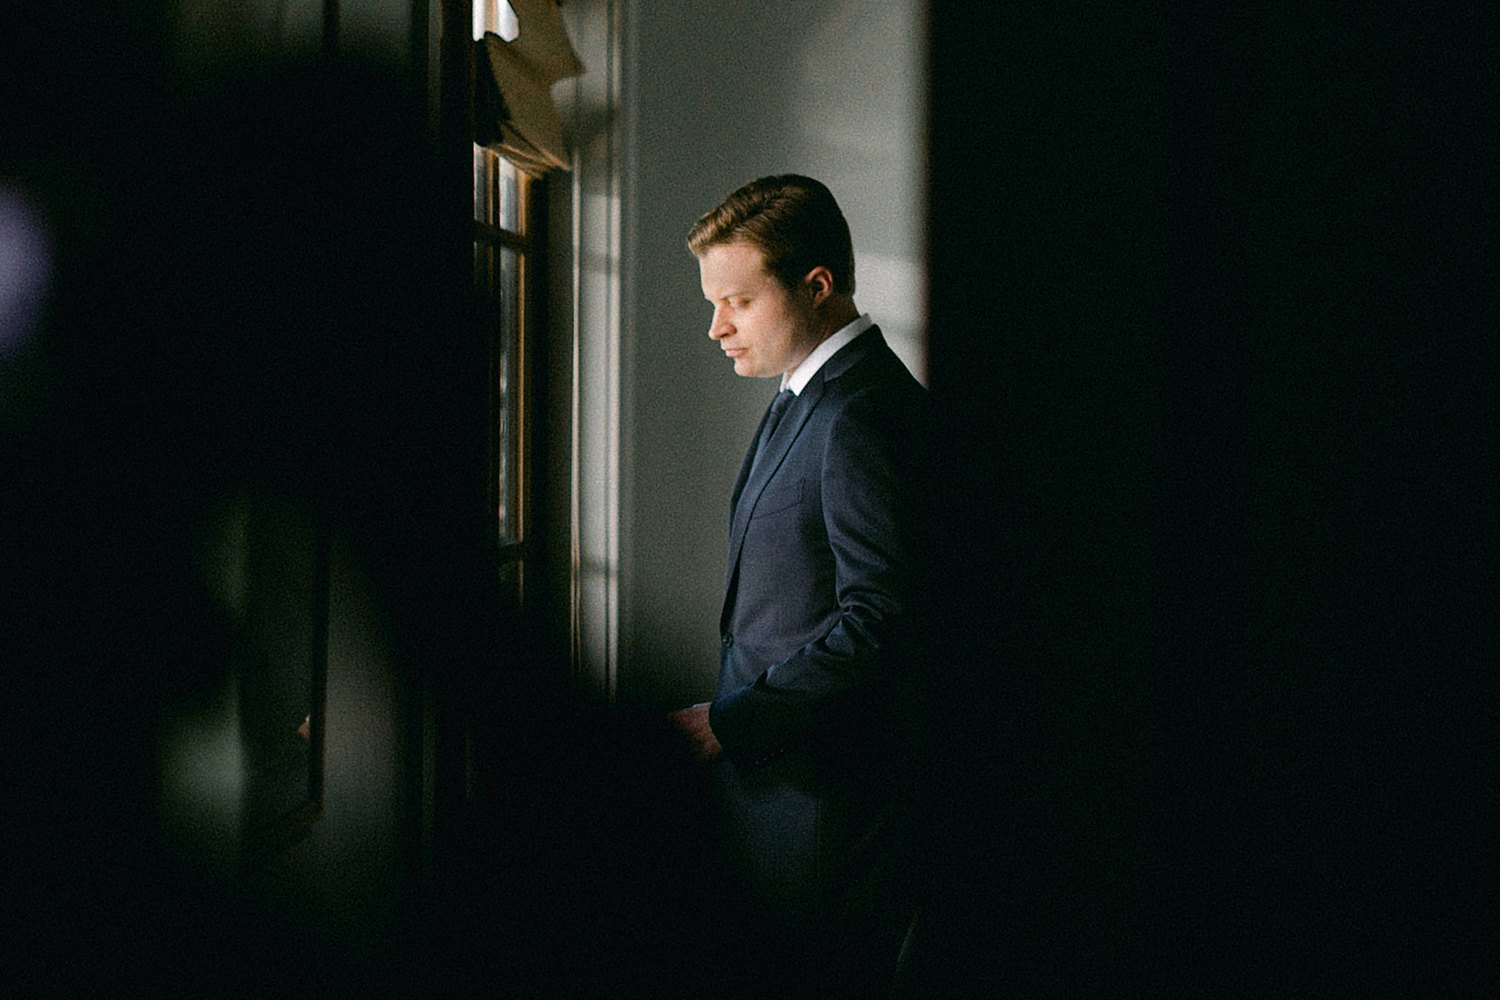 man in suit looking out window